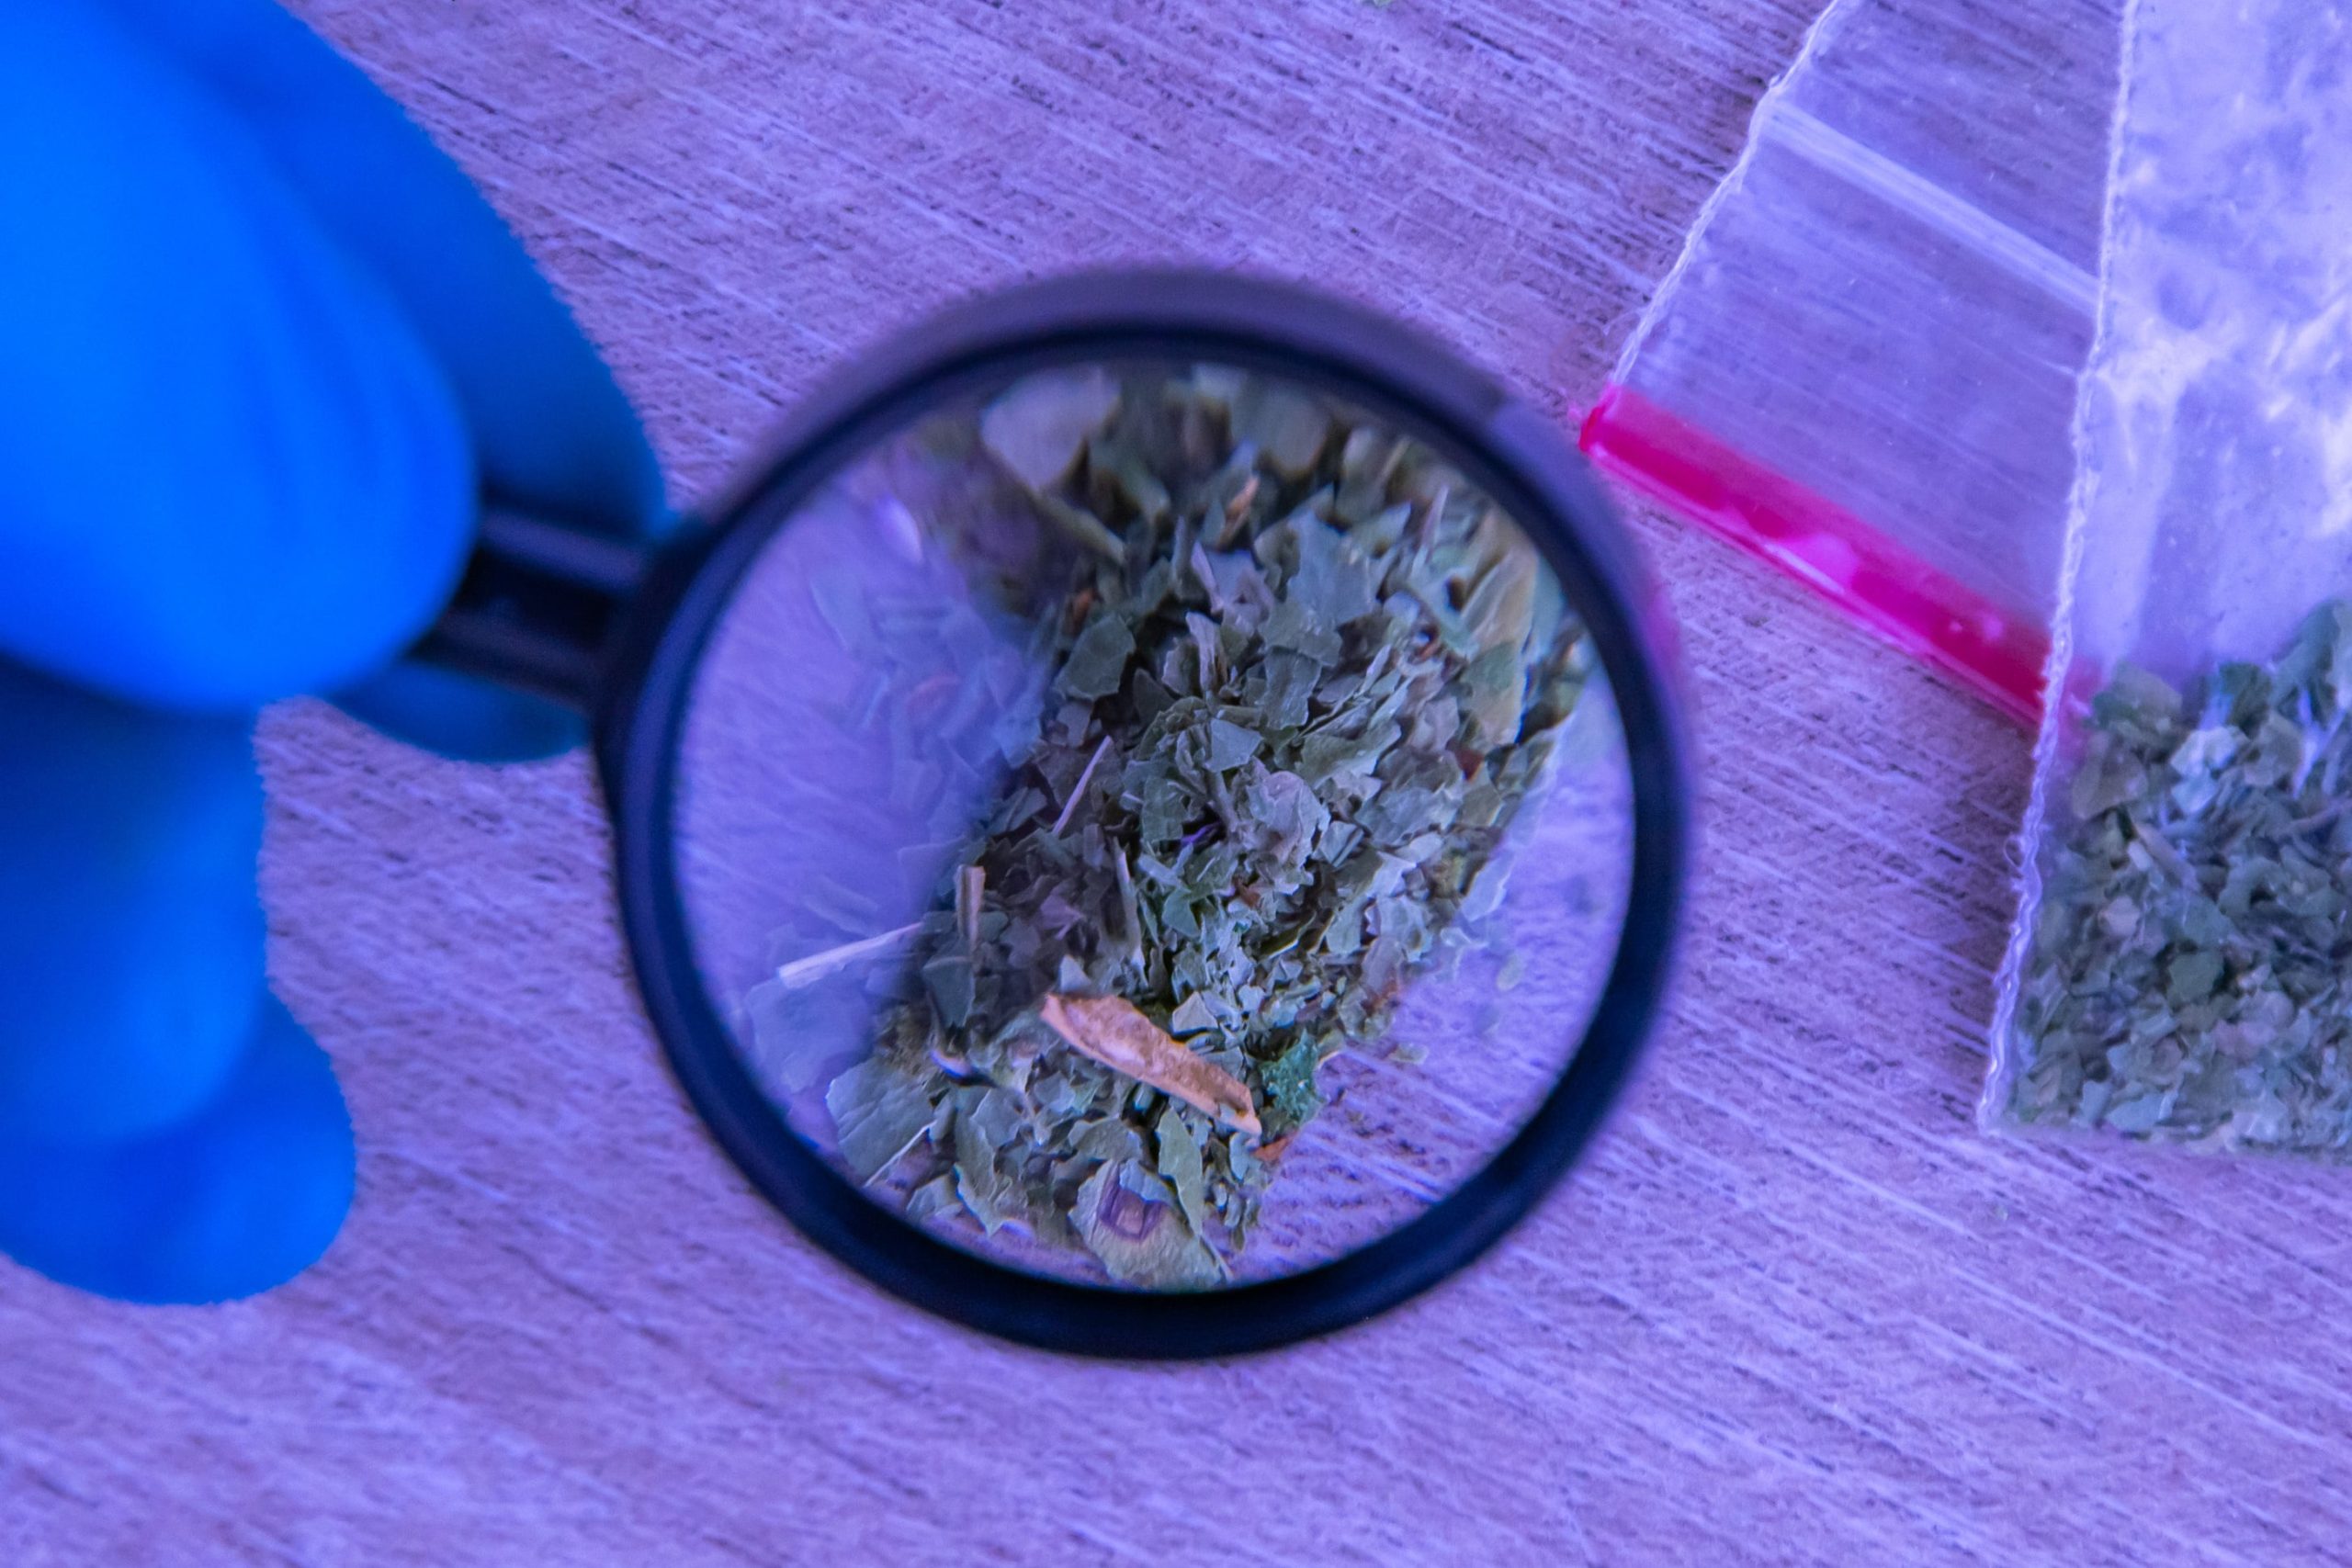 synthetic drugs under a magnifying glass